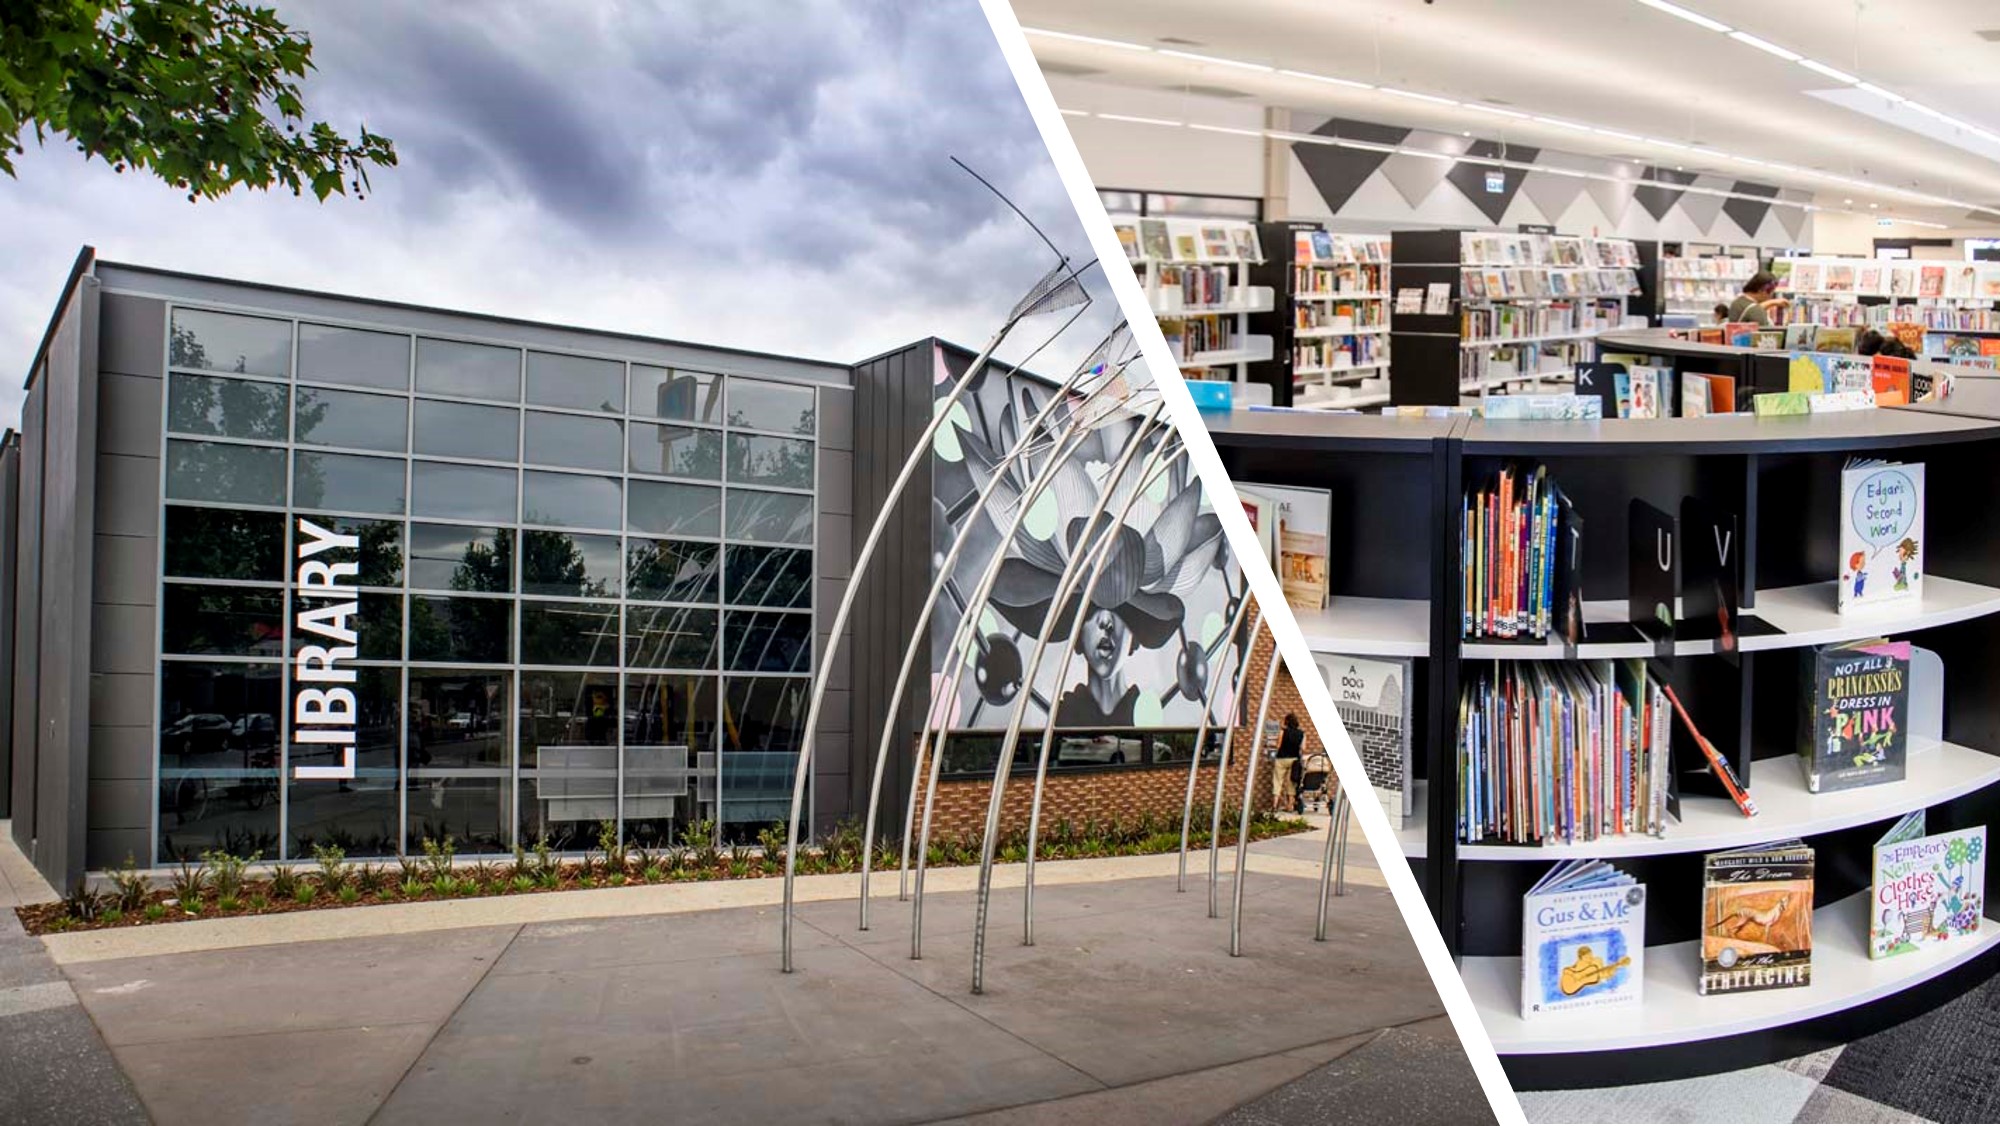 Collage of two pictures, left is the front of a library and right is the inside of a library